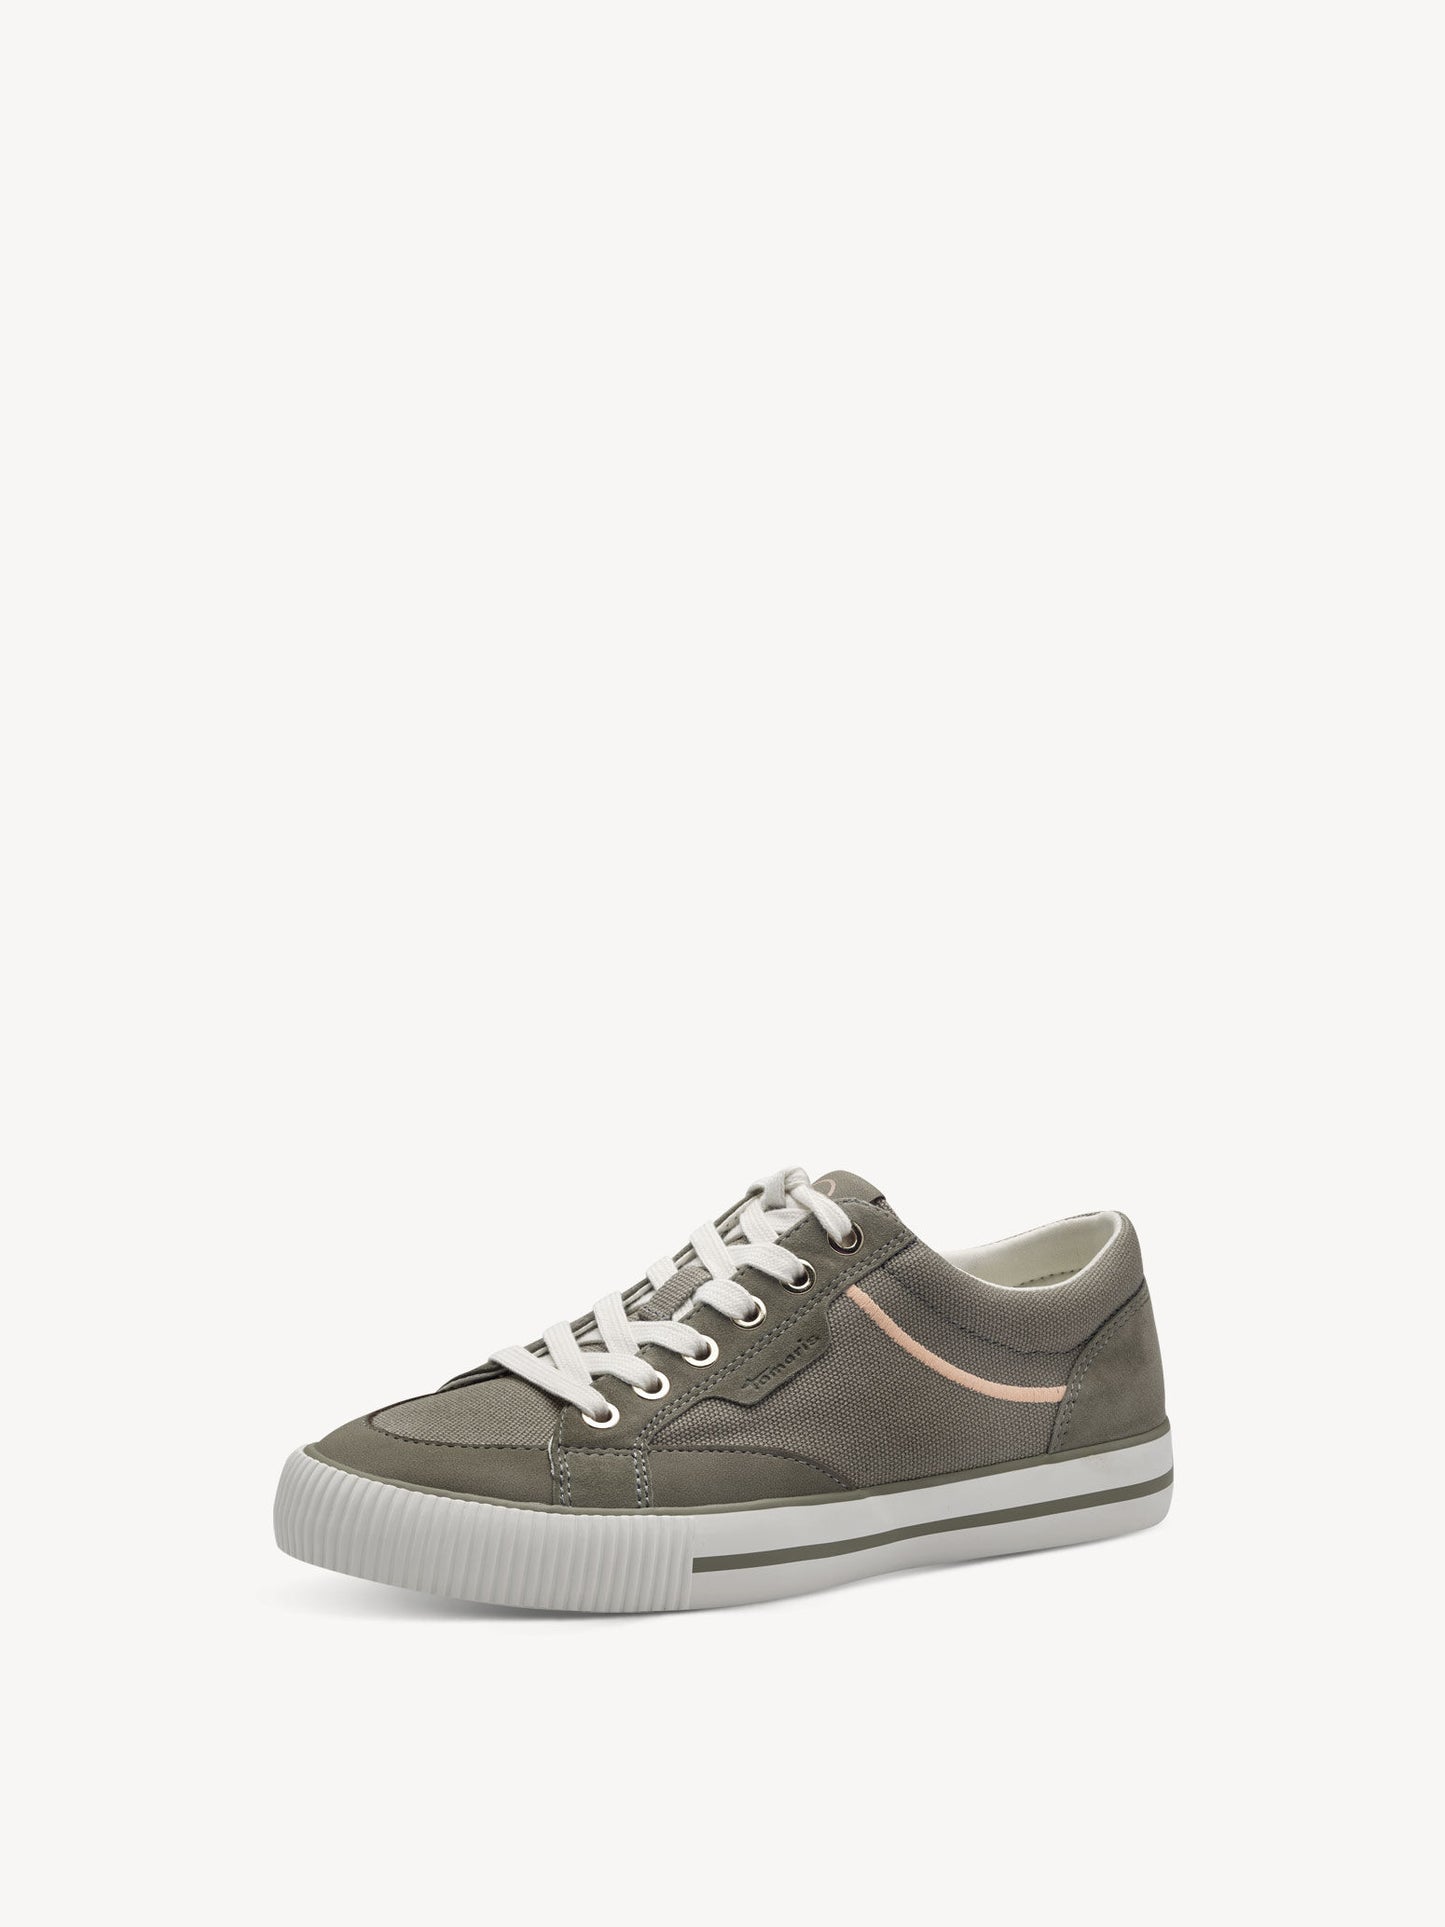 Tamaris Women's 1-23607-42 Leather Lace-Up Sneakers Olive Green